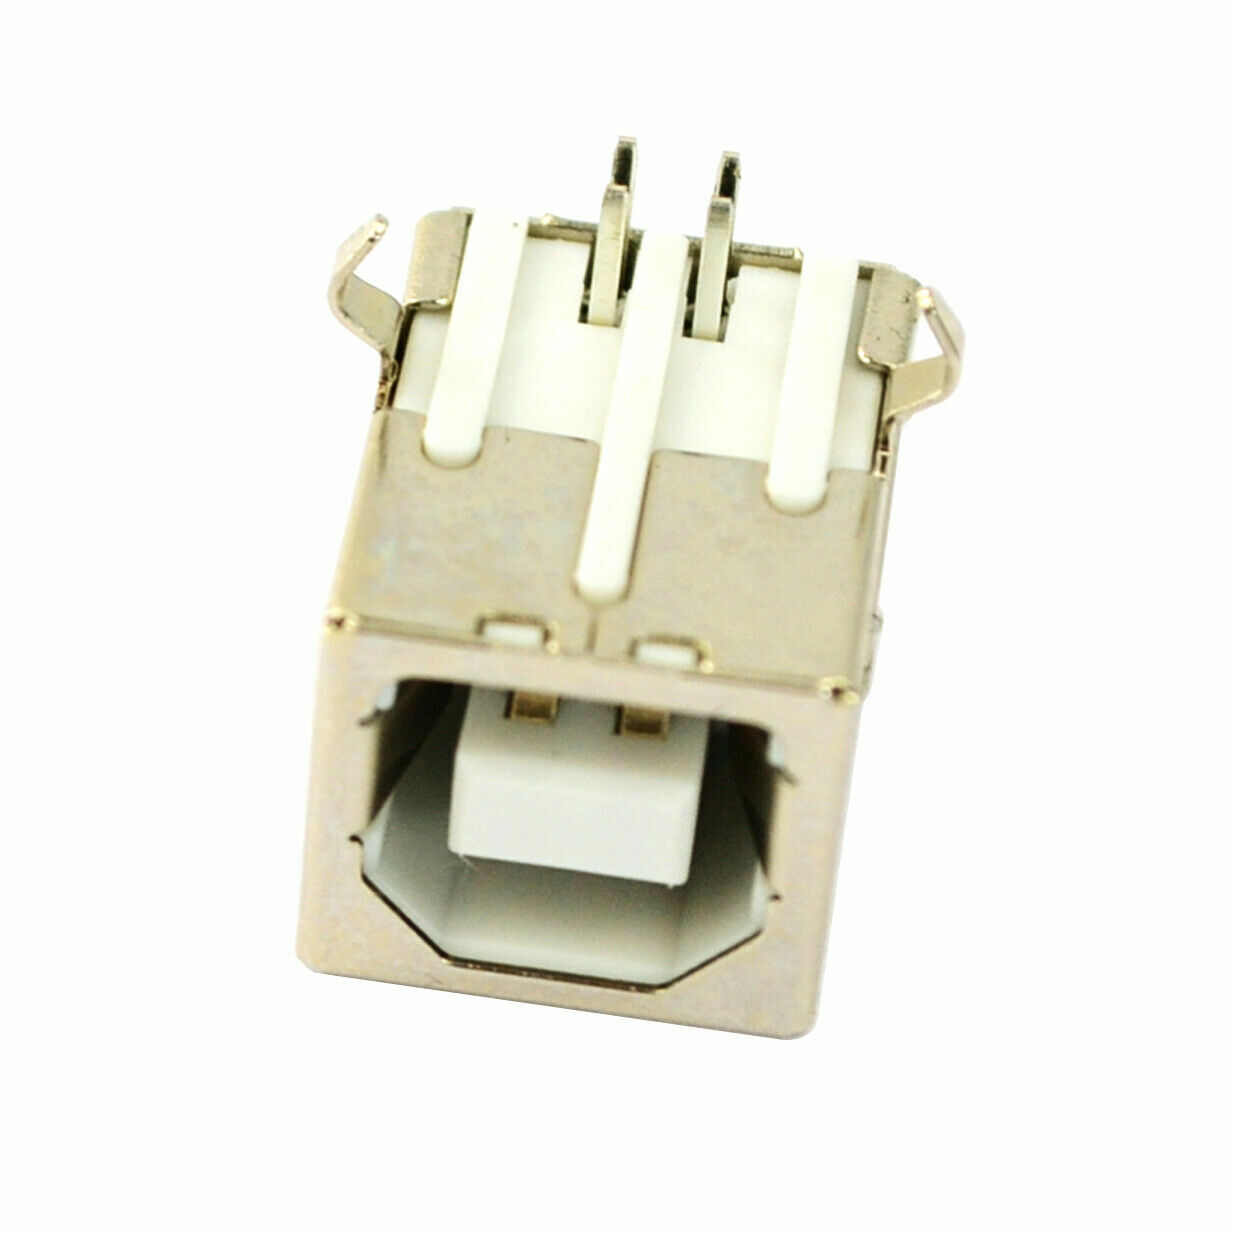 New 5 pcs USB Port 2.0 Connector Type-B Female for Solder Printer Unbranded Does Not Apply - фотография #3